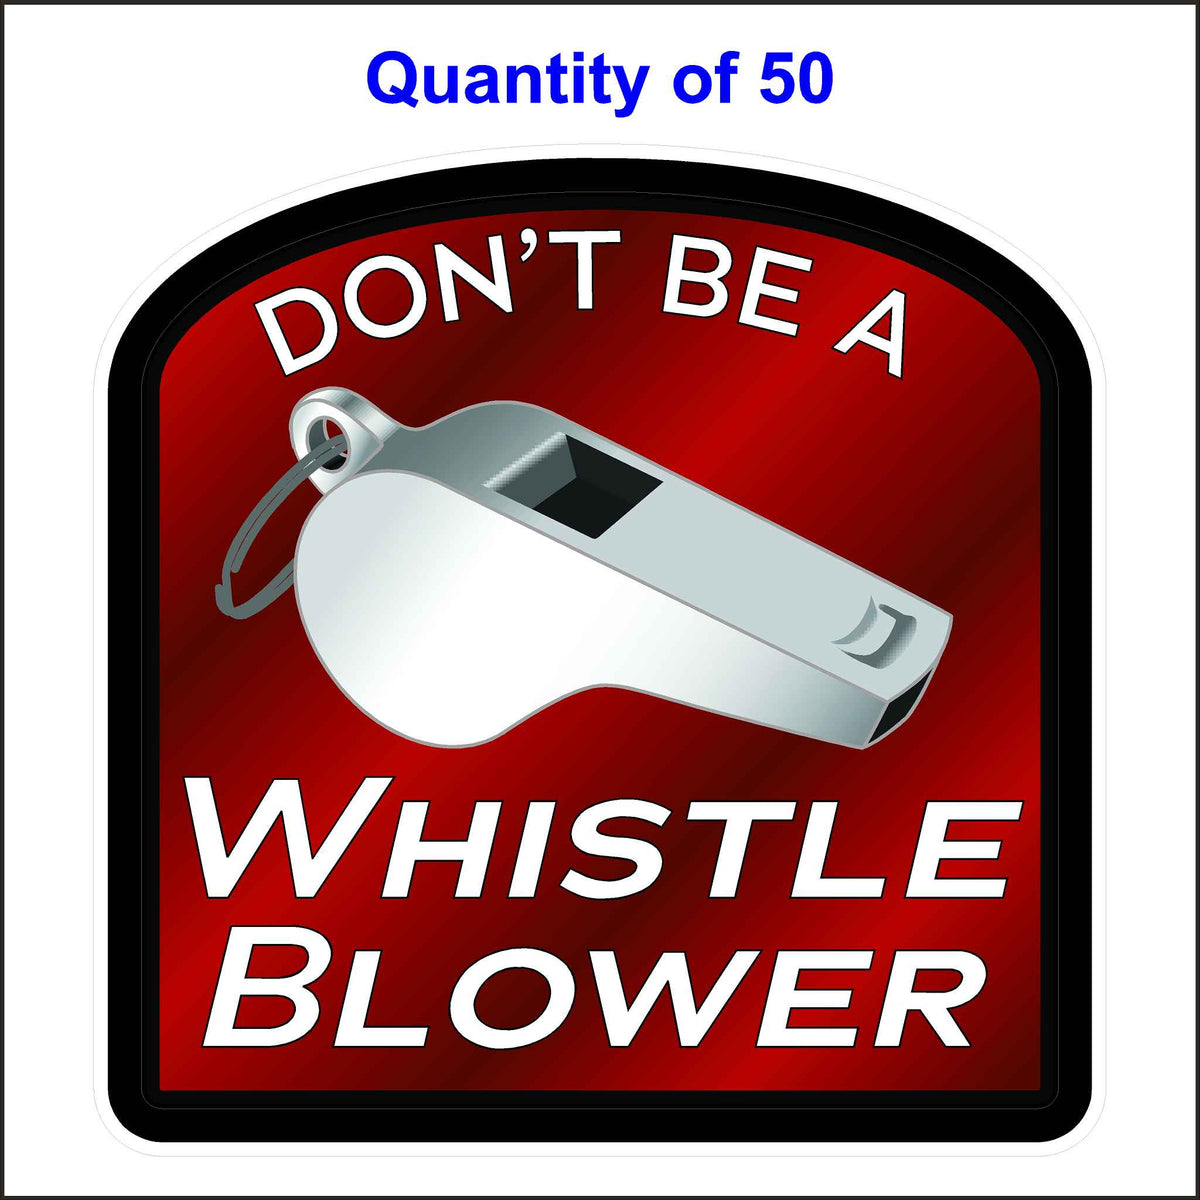 Don’t Be a Whistleblower Sticker. Red and Black With White Letters and a Silver Whistle. 50 Quantity.